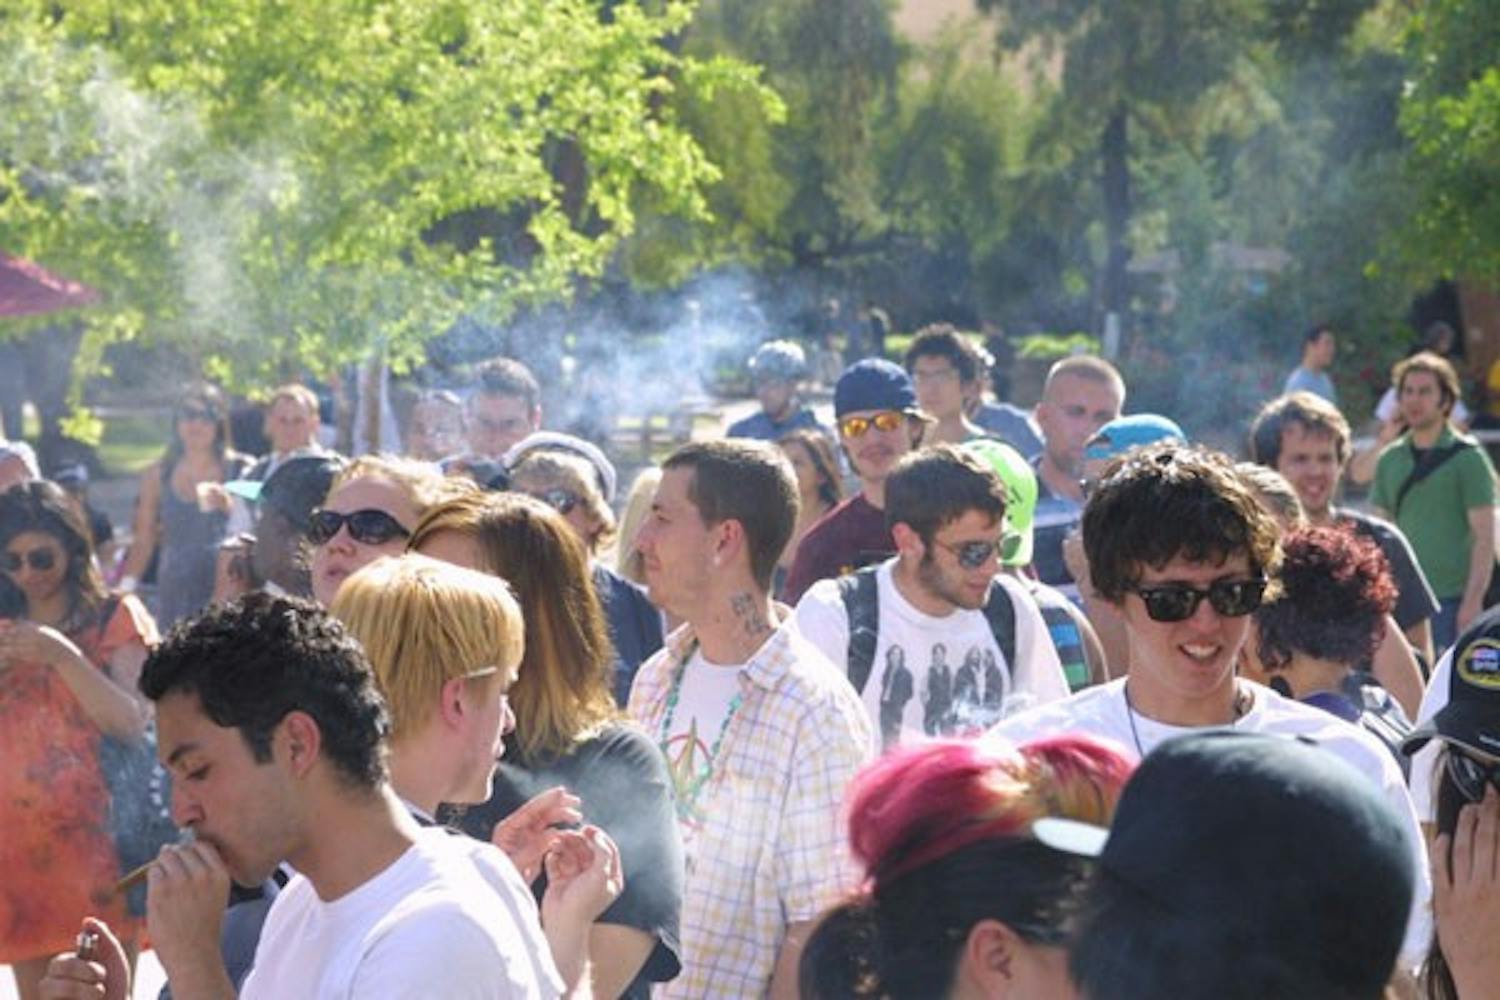 JOINT EFFORT: A haze of smoke rises above hundreds gathered to celebrate 4/20 with imitation marijuana in front of the Memorial Union Tuesday afternoon. (Photo by Serwaa Adu-Tutu)